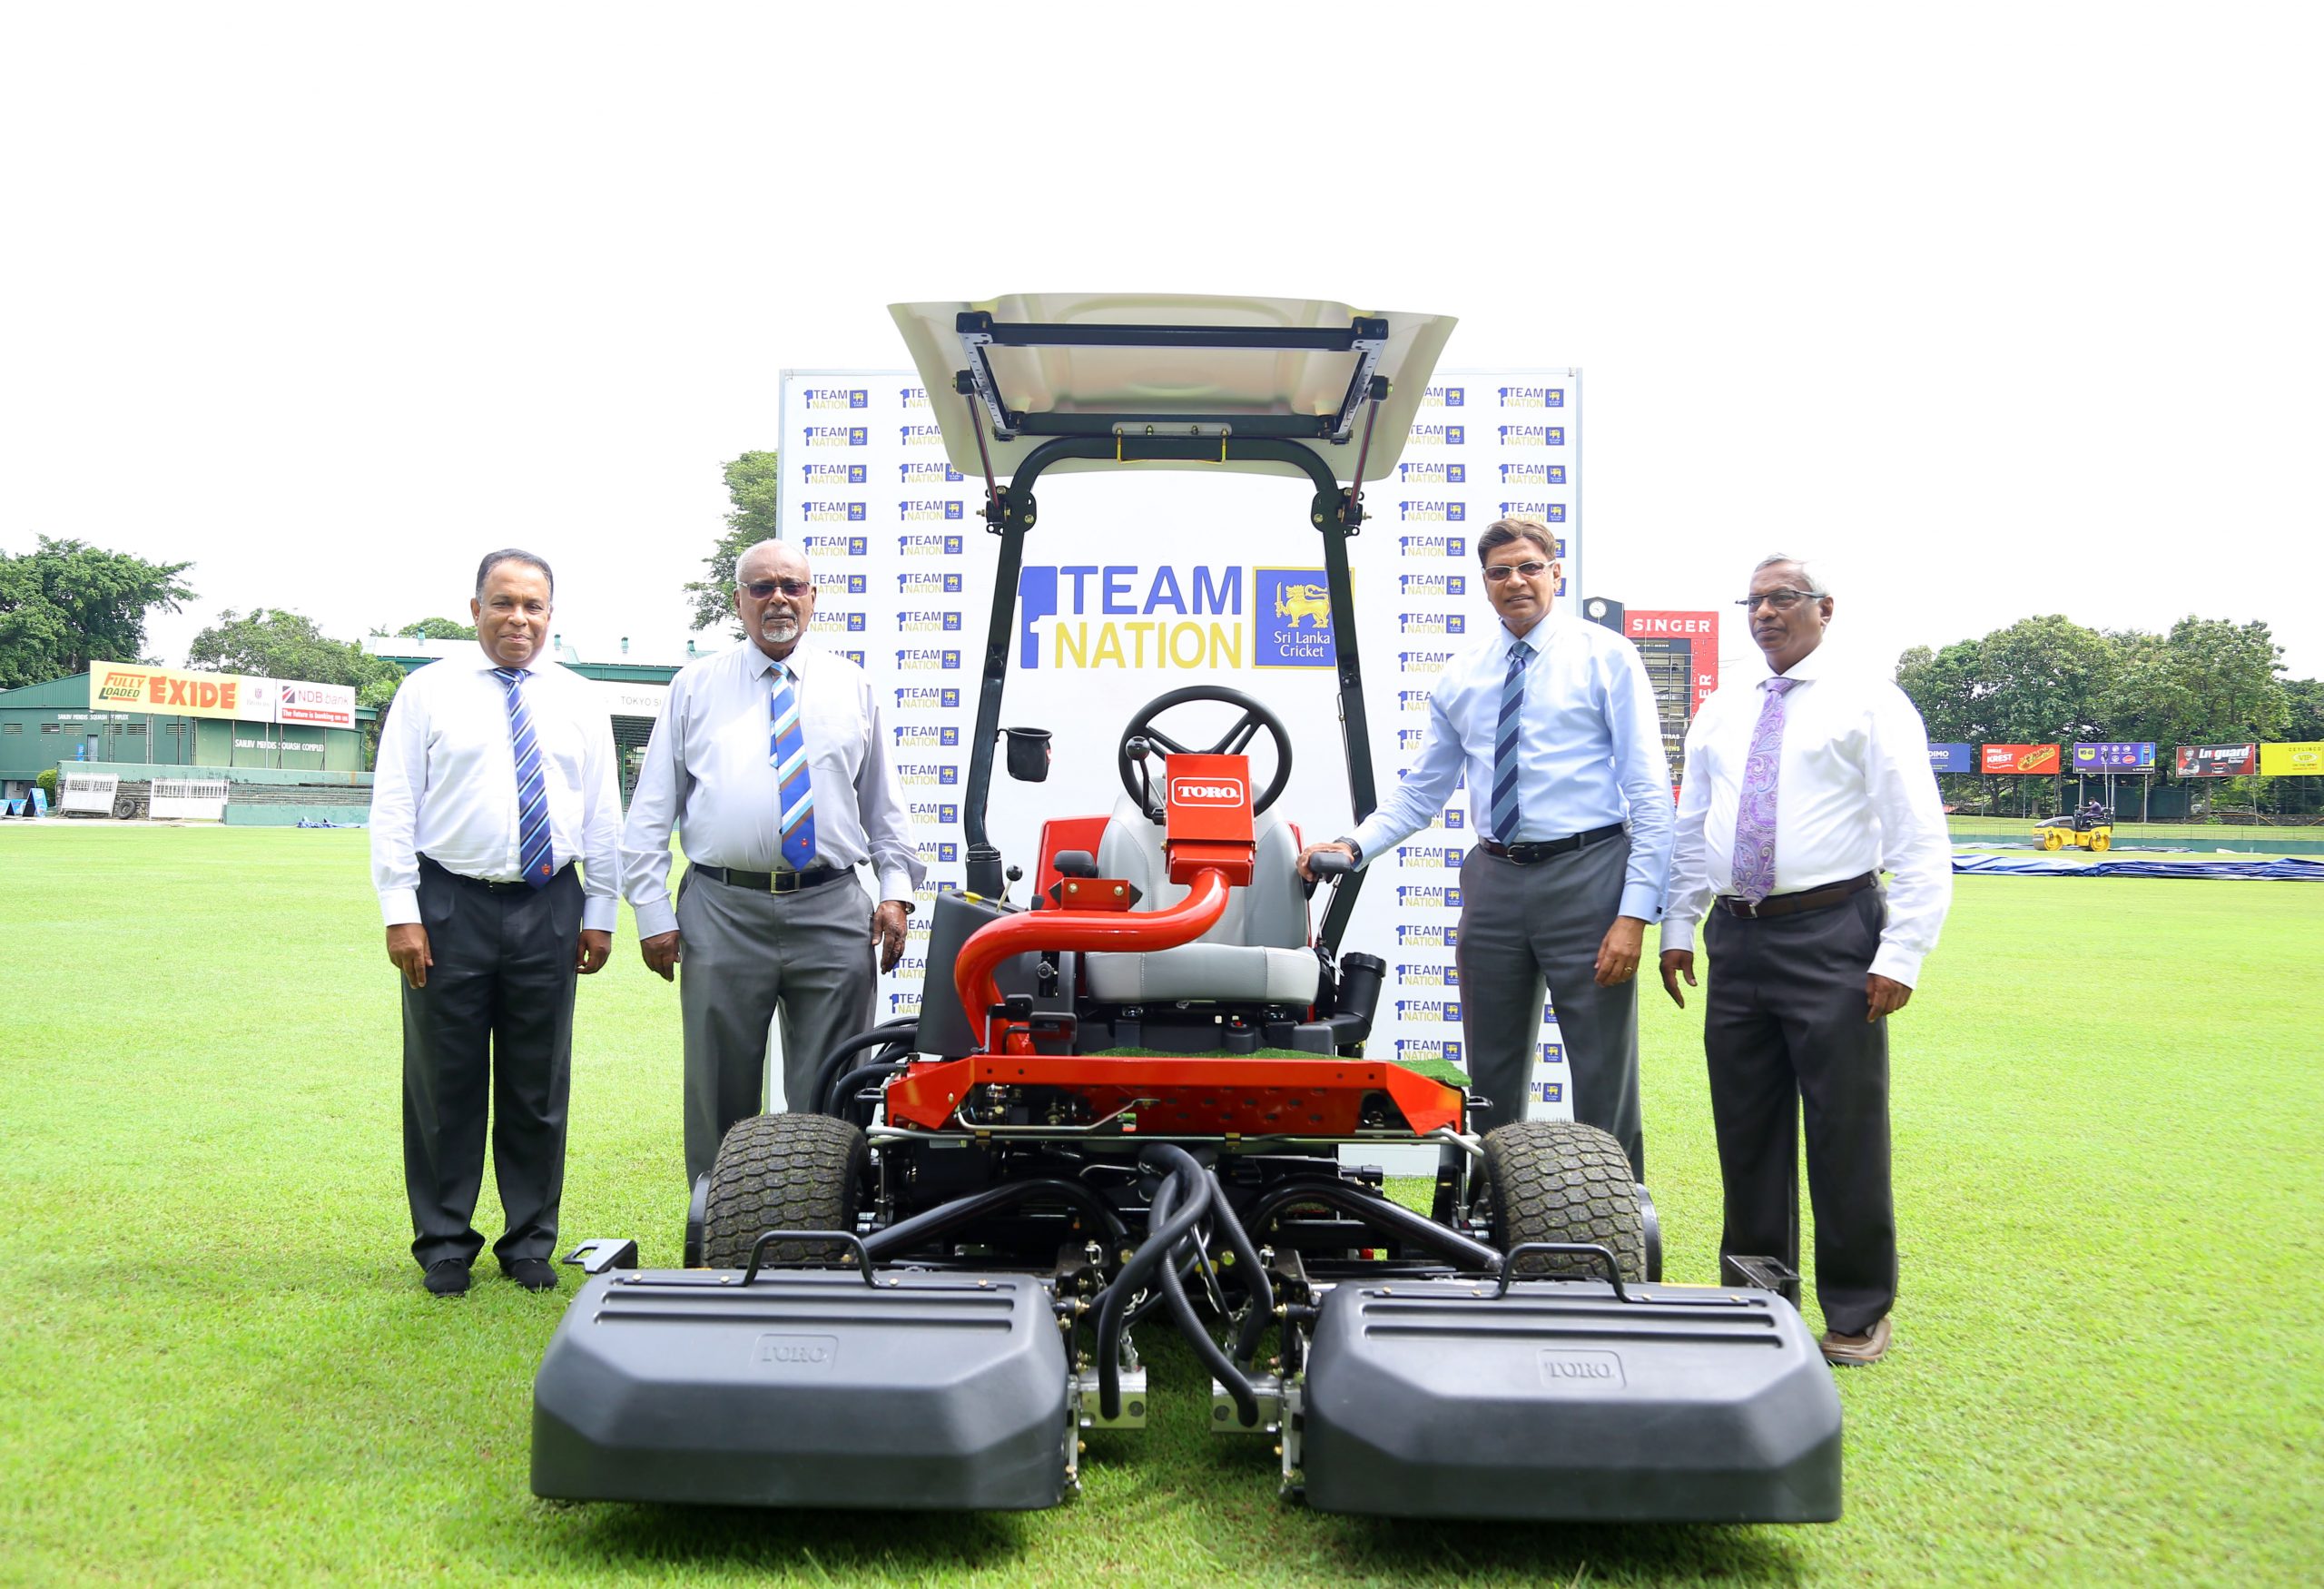 SLC donated a high-powered turf cutter to SSC